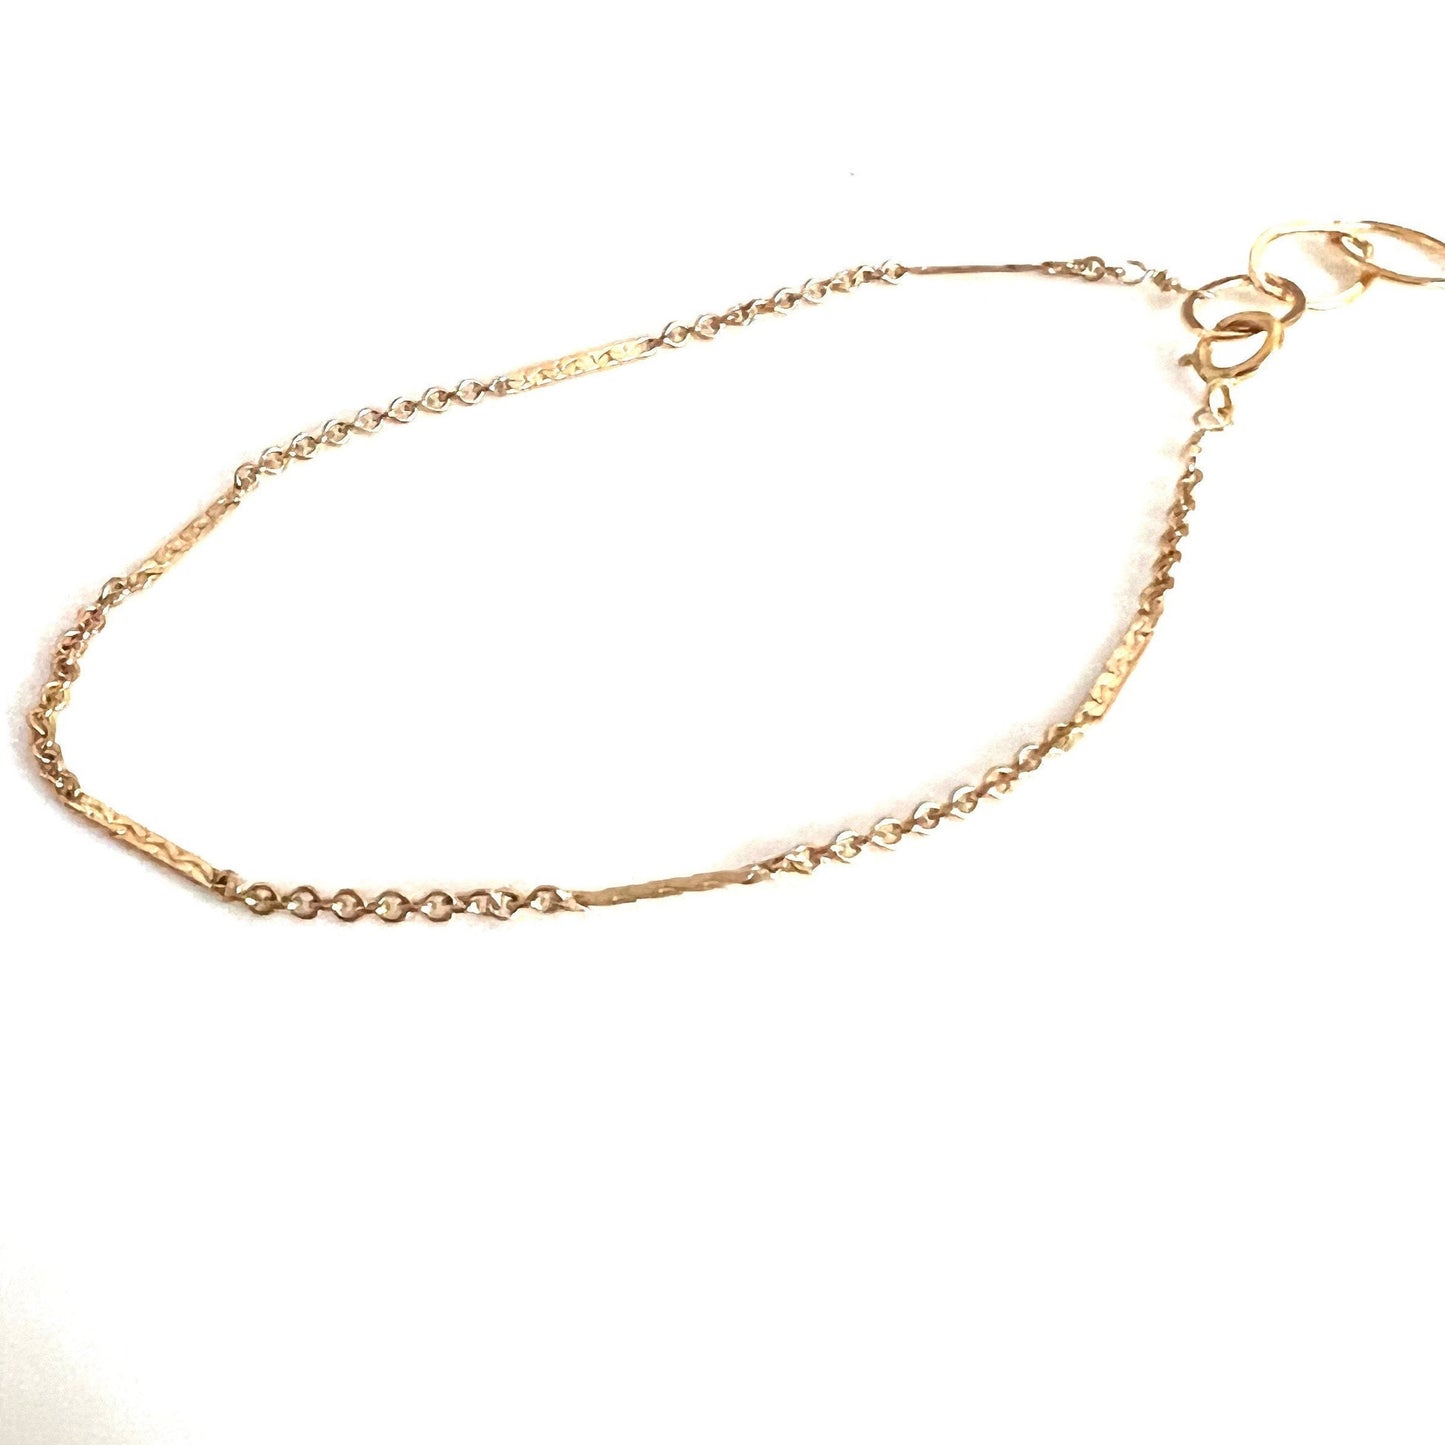 Dainty bar chain anklet